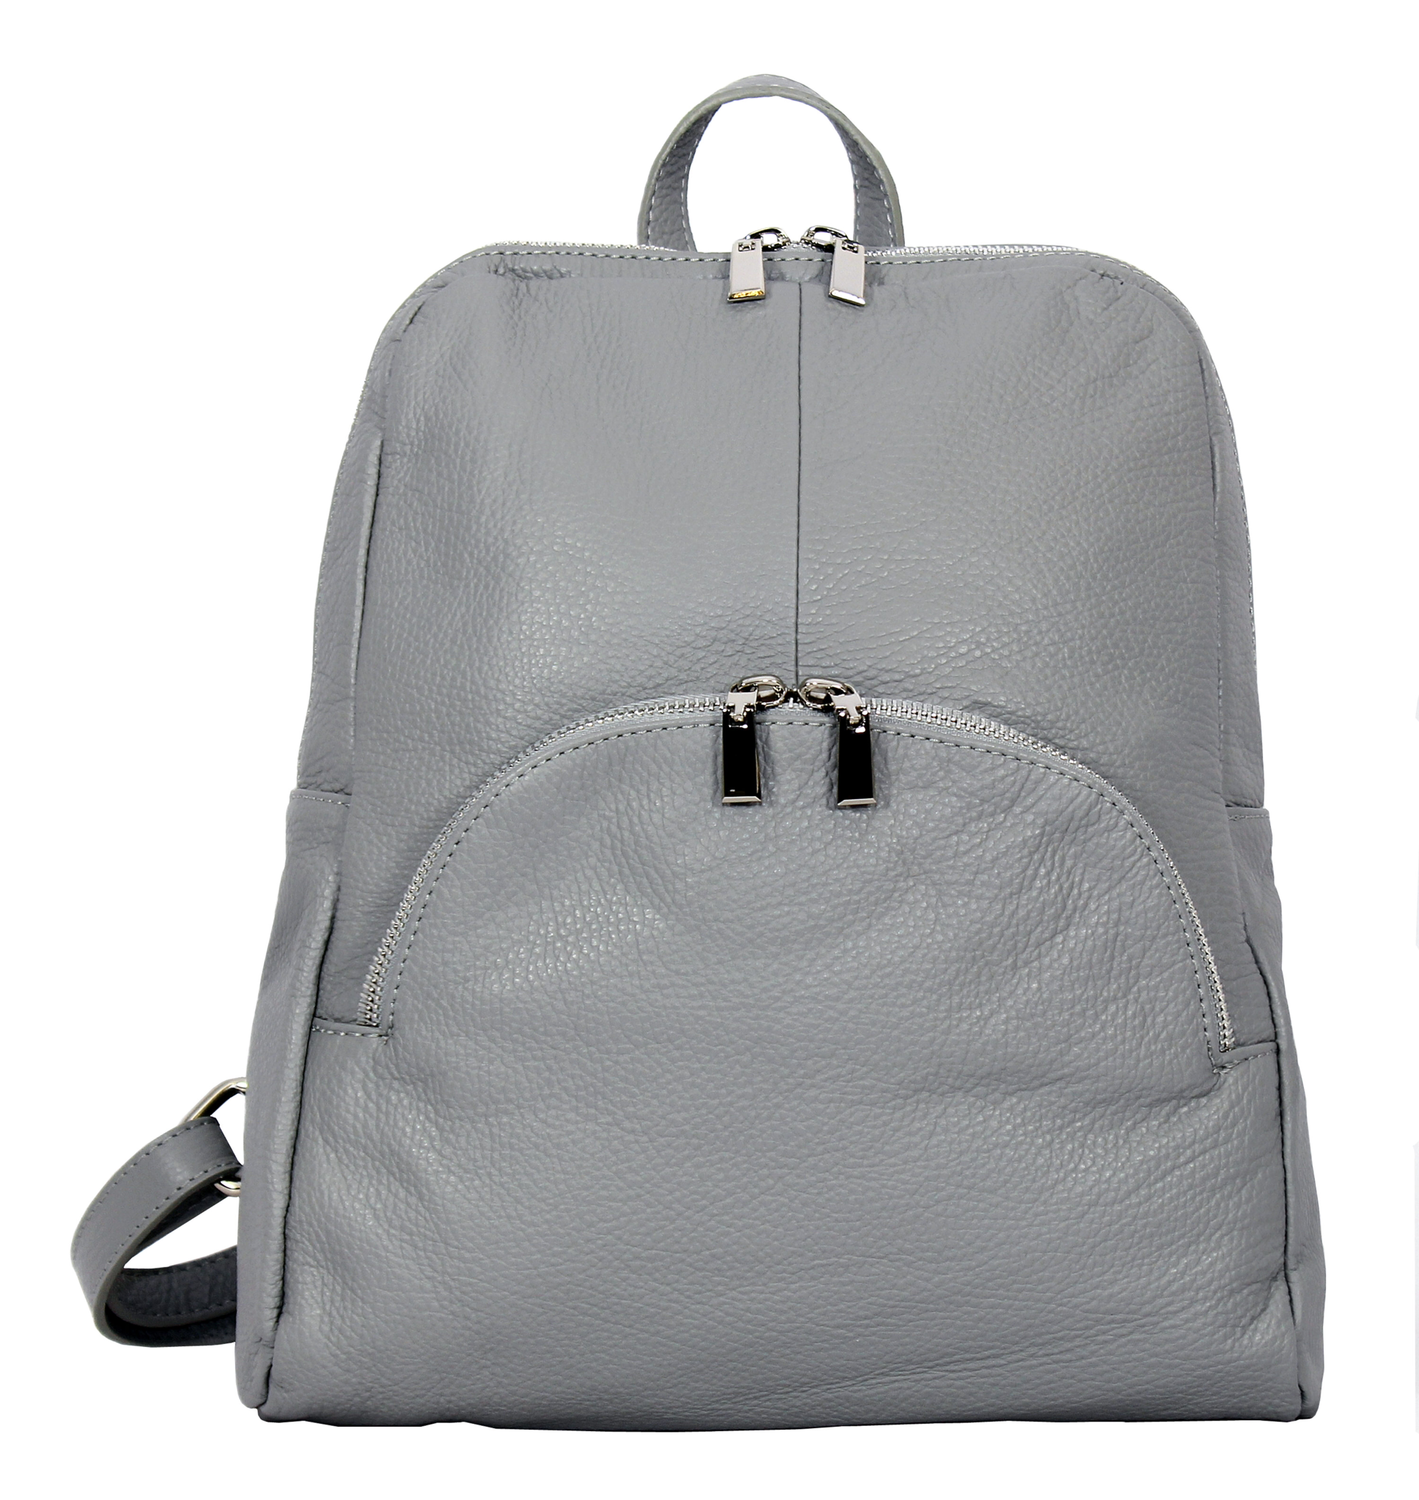 Light Grey Textured Leather Backpack 